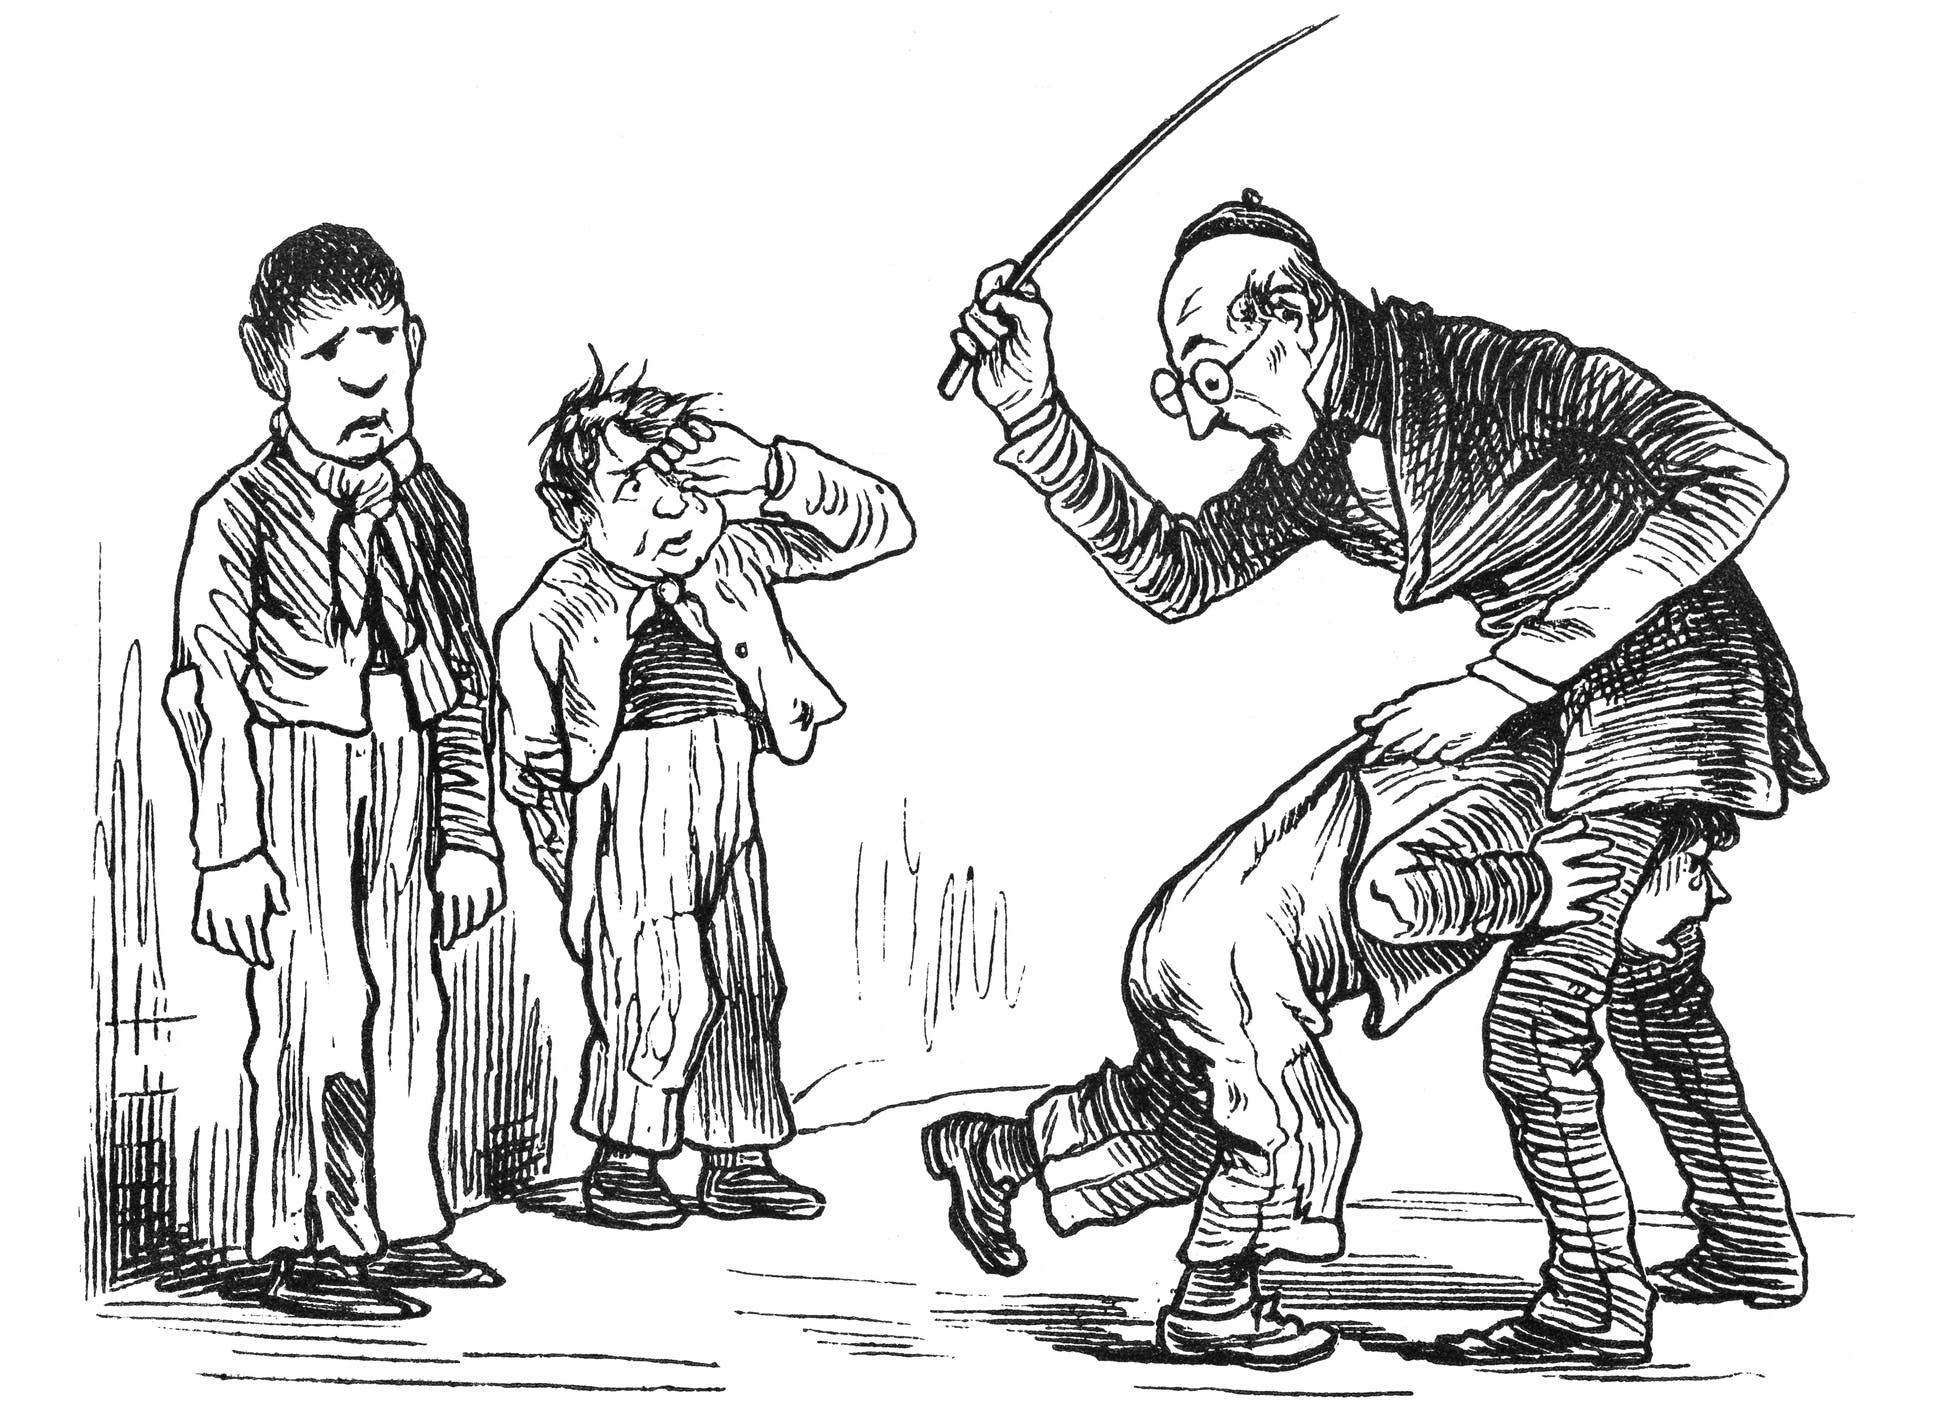 Why the culture of corporal punishment must end